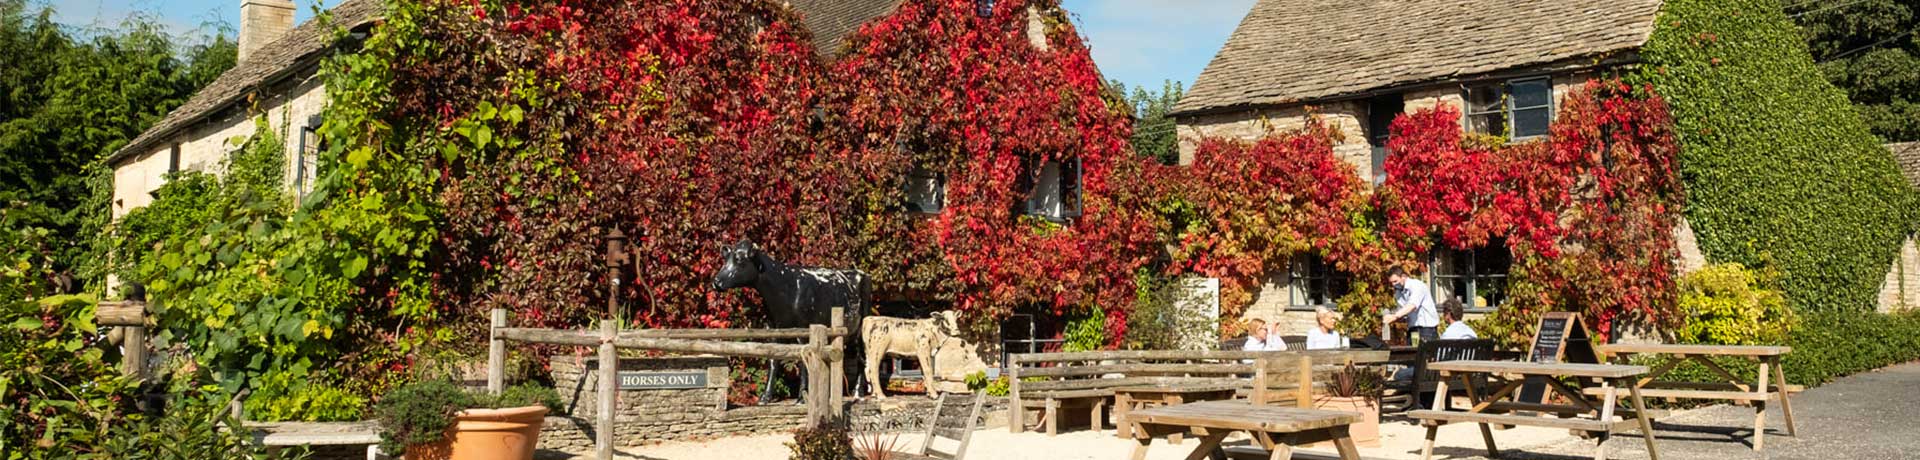 Best Sunday roasts in the Cotswolds